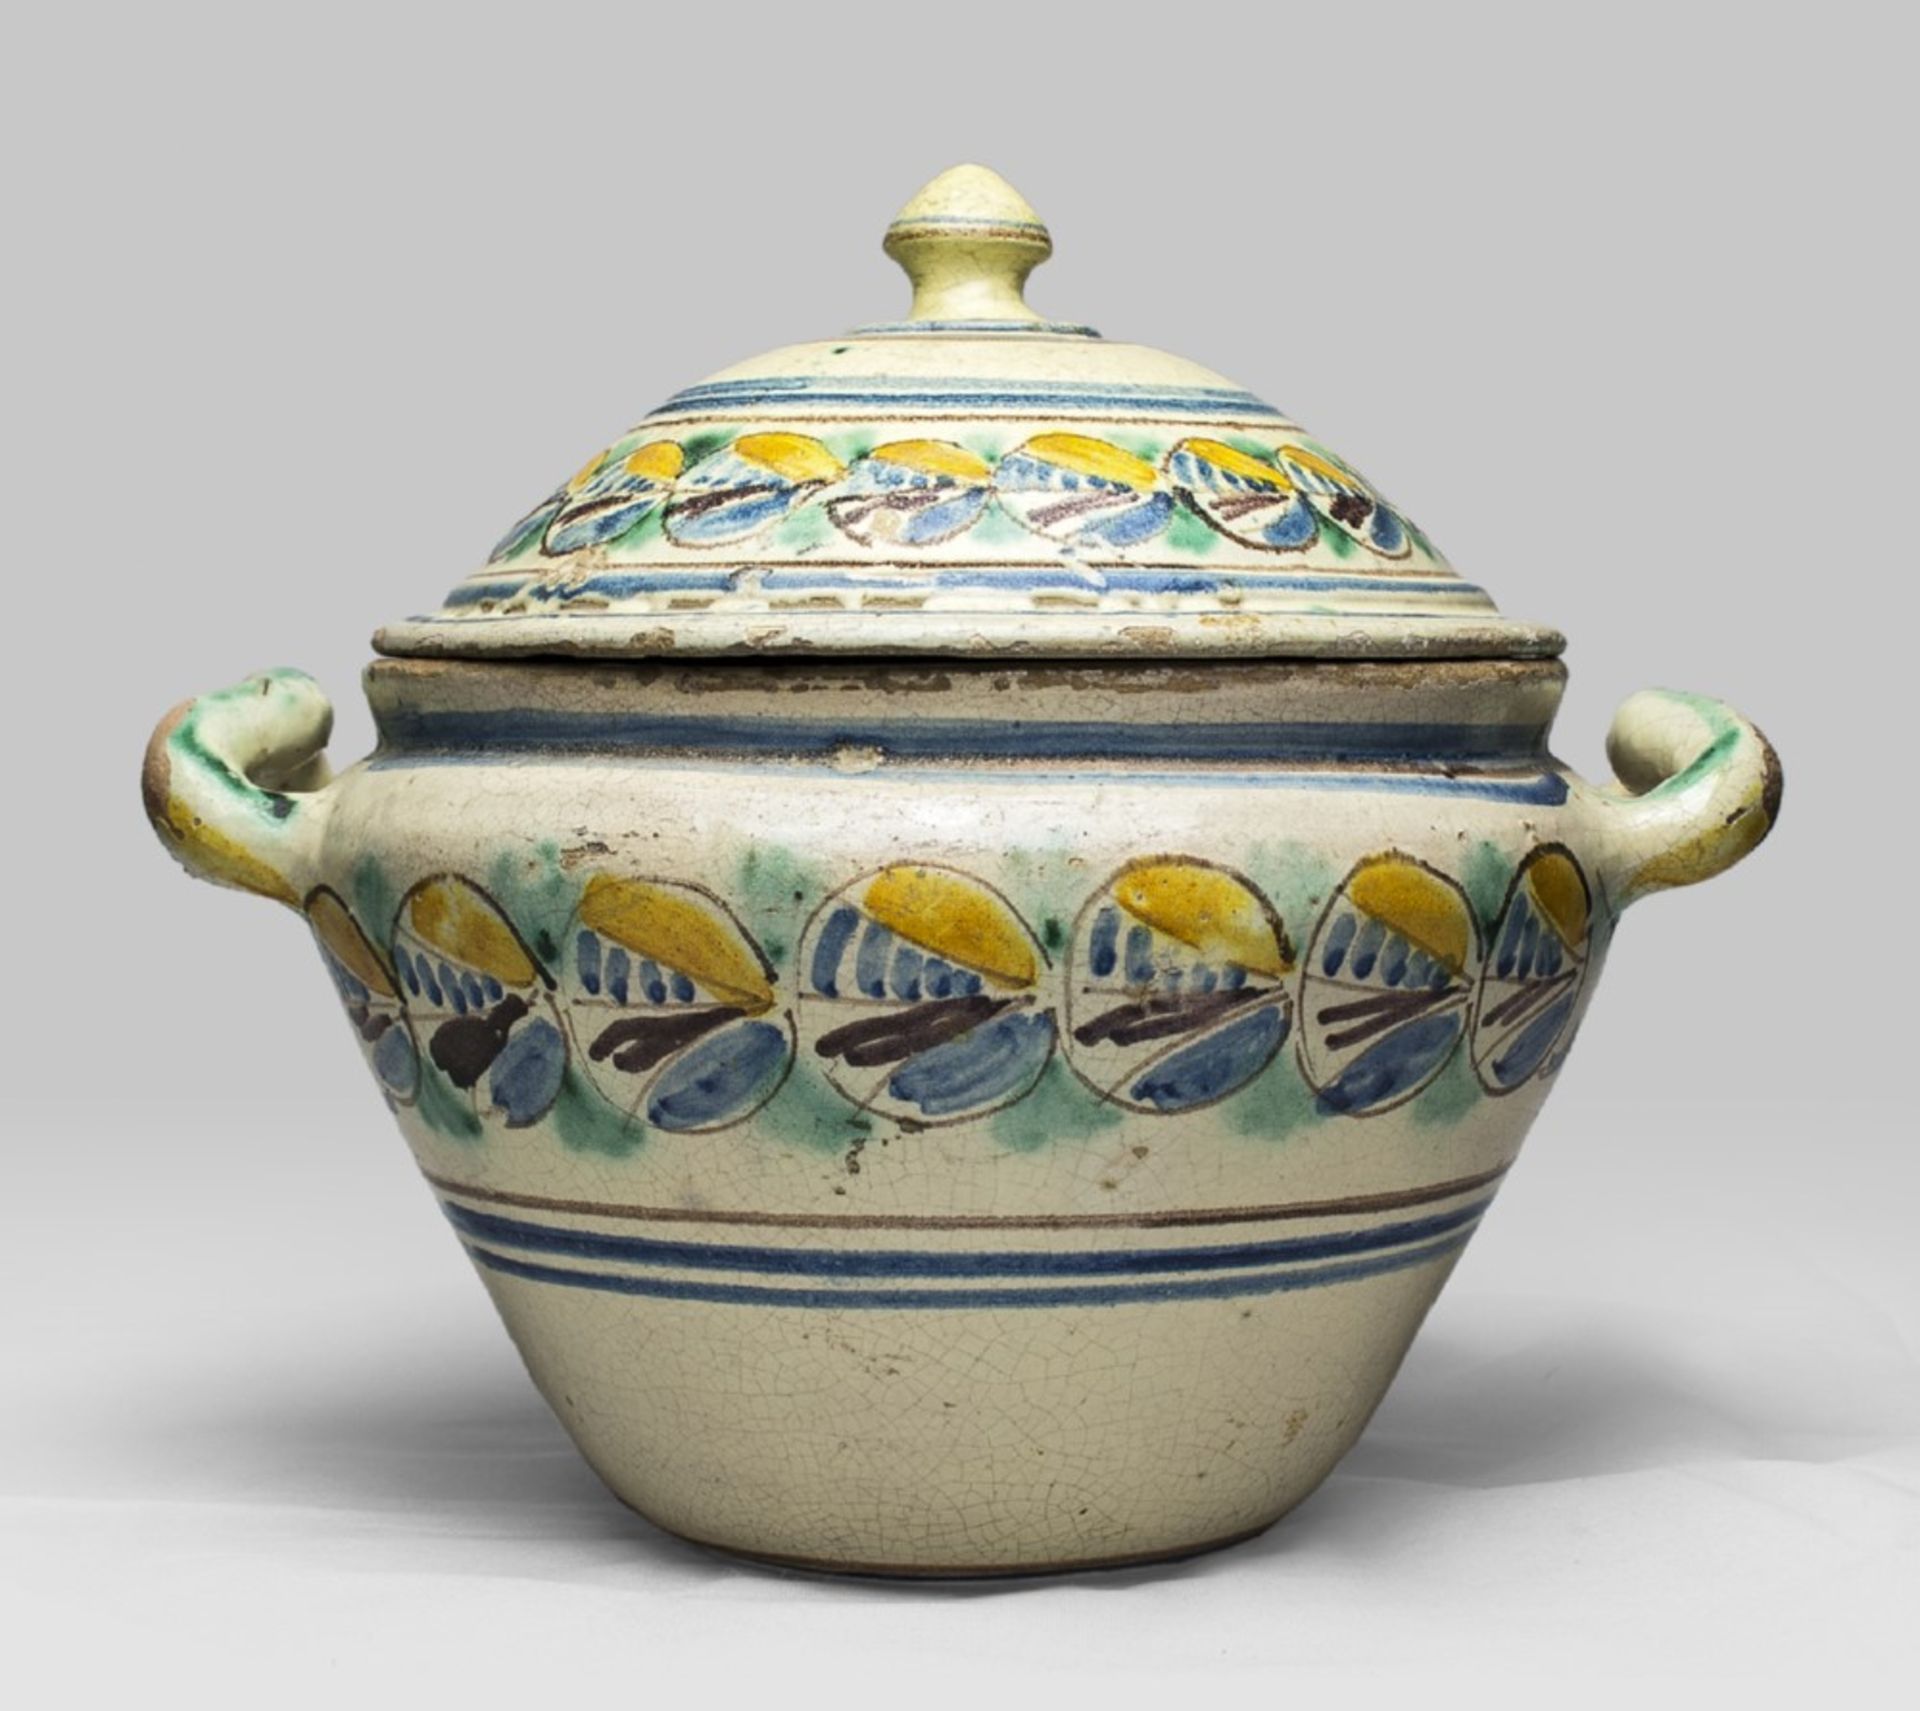 LARGE CERAMIC TUREEN, SOUT ITALY 19TH-CENTURY White and polychrome enamel decorated with bands of